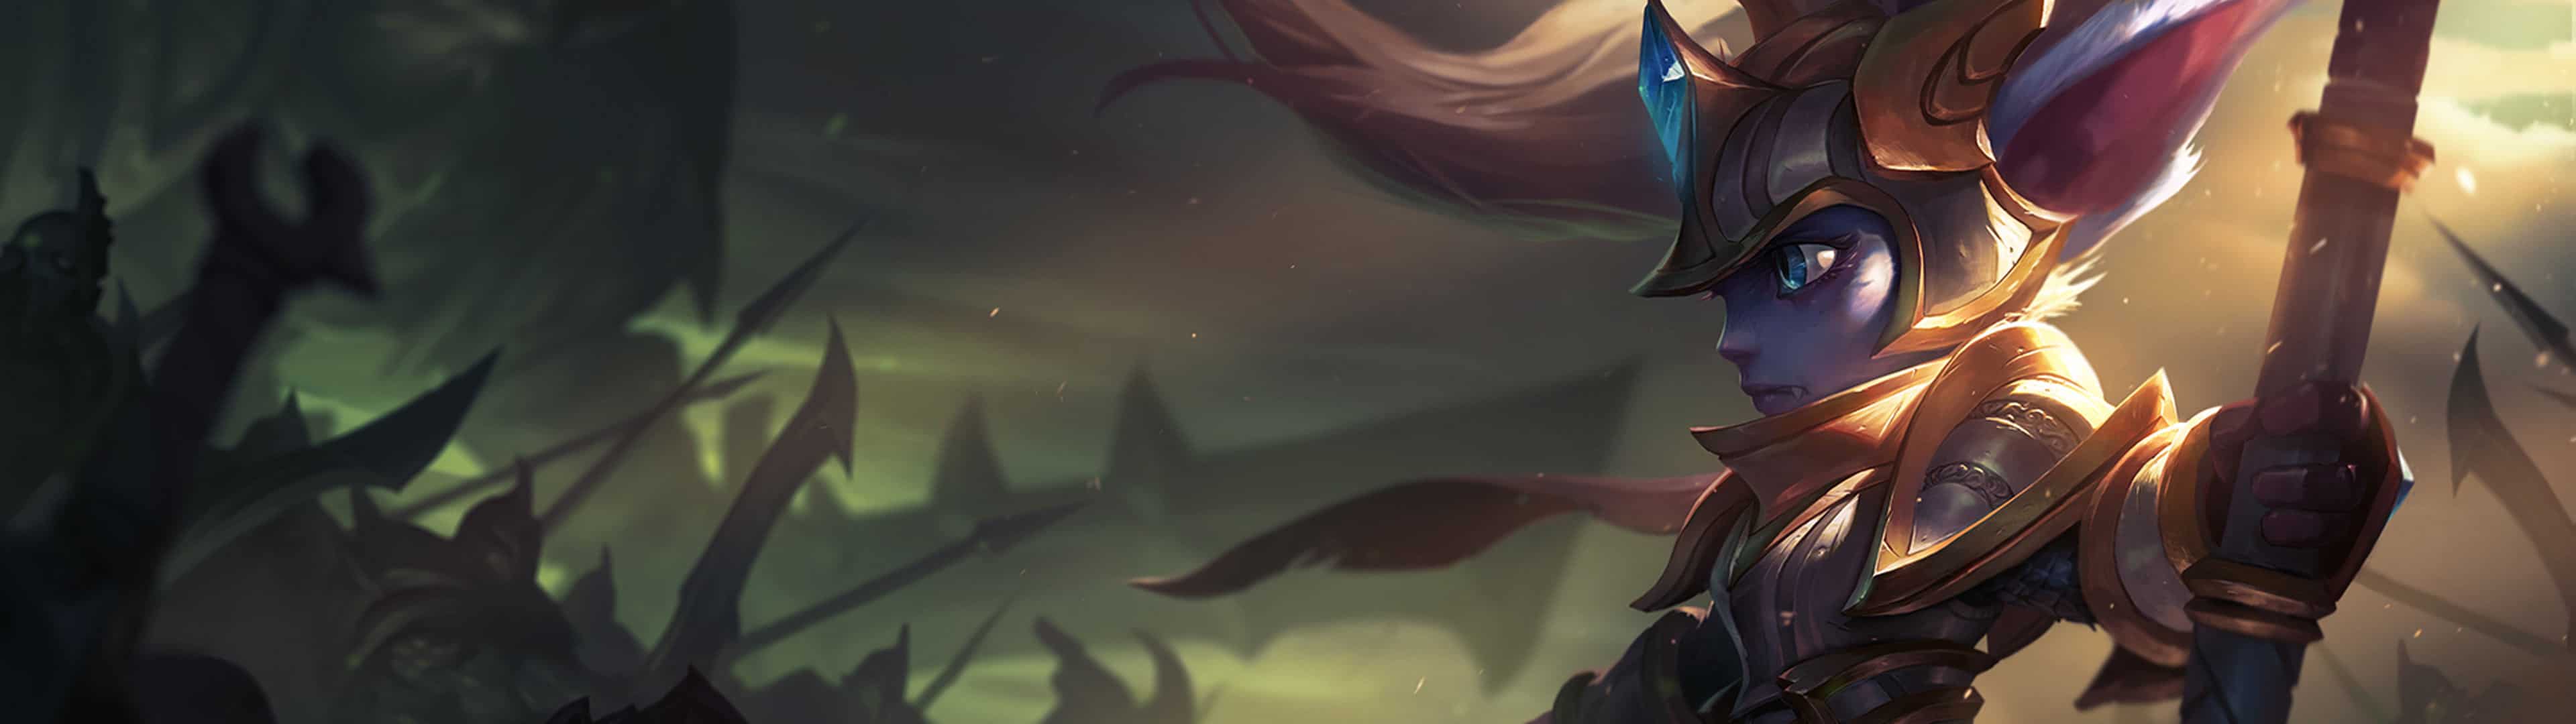 League Of Legends Champion Poppy Dual Monitor Wallpaper - League Of Legends Poppy Skins - HD Wallpaper 